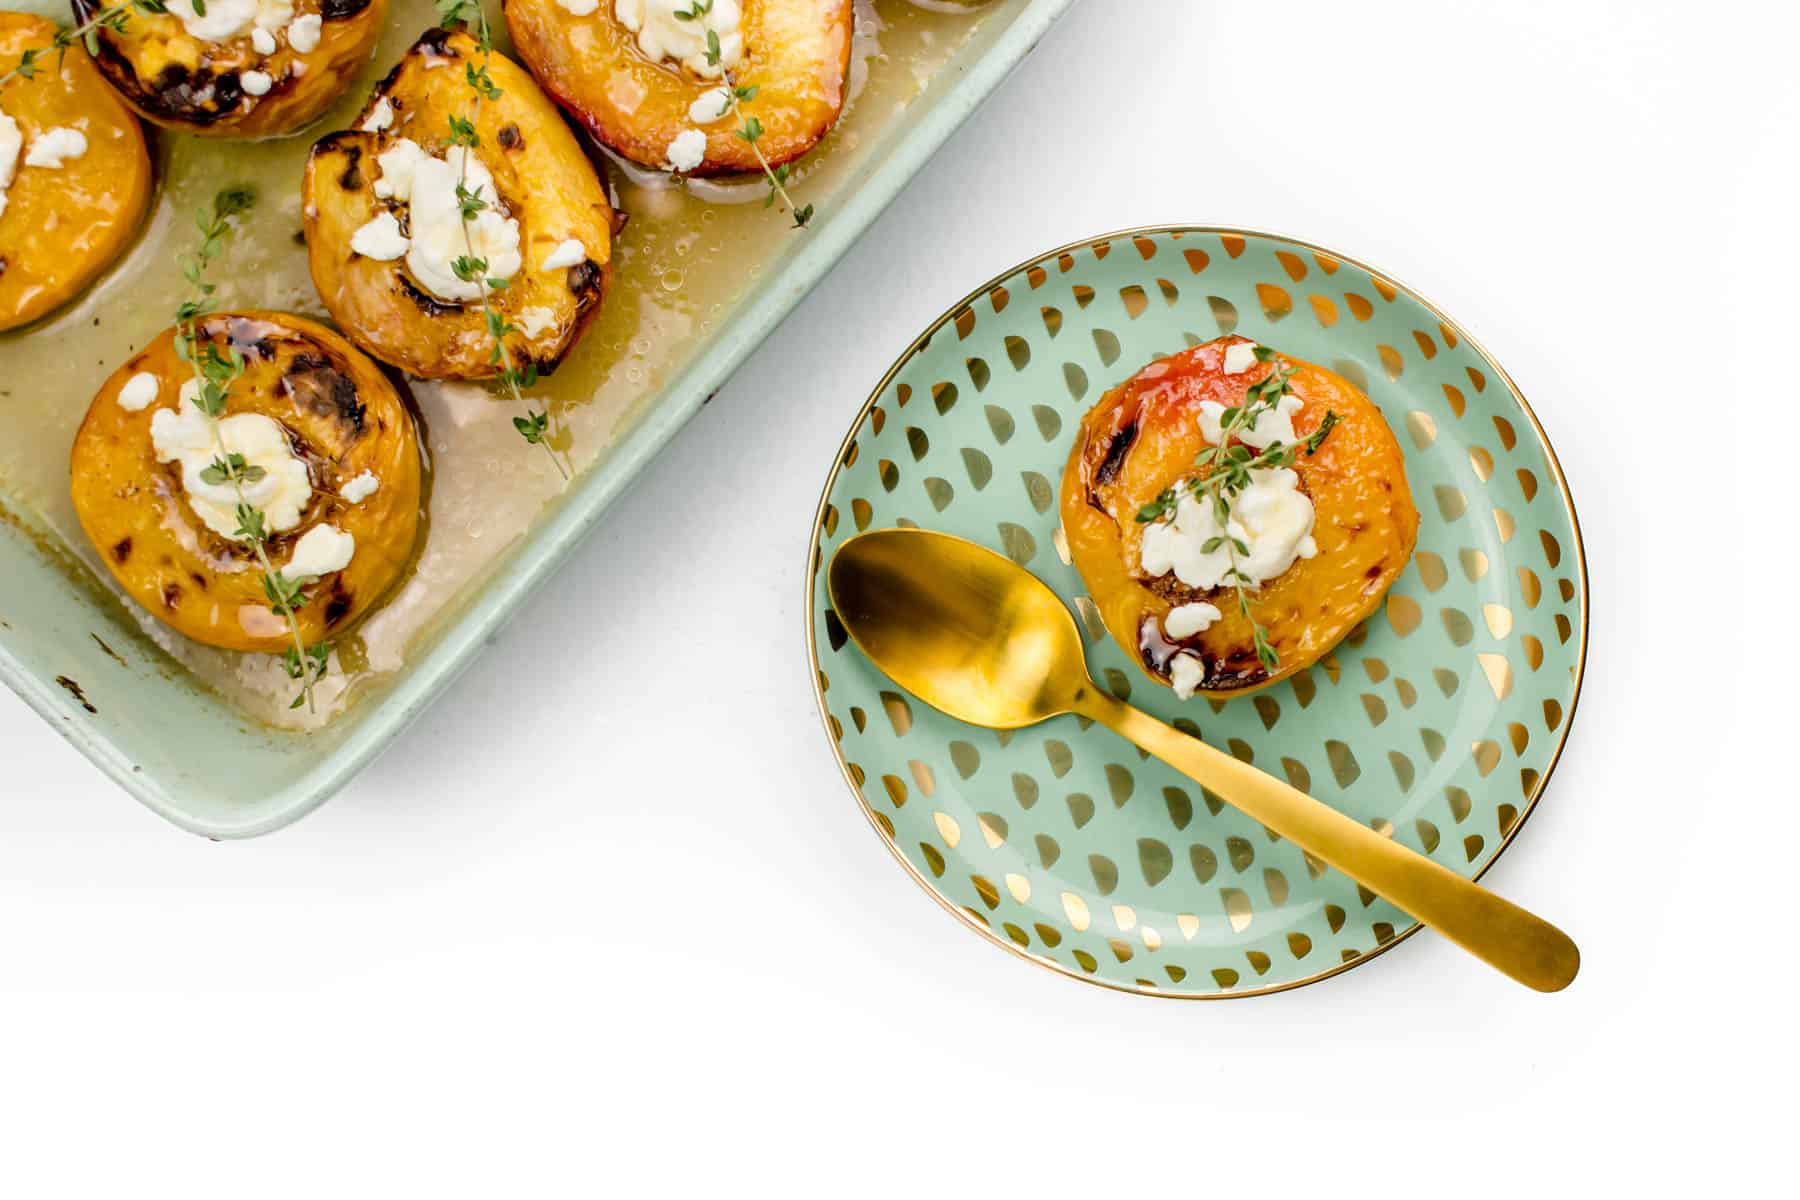 Baked peaches in a green baking dish next to a speckled plate with a baked peach on it.